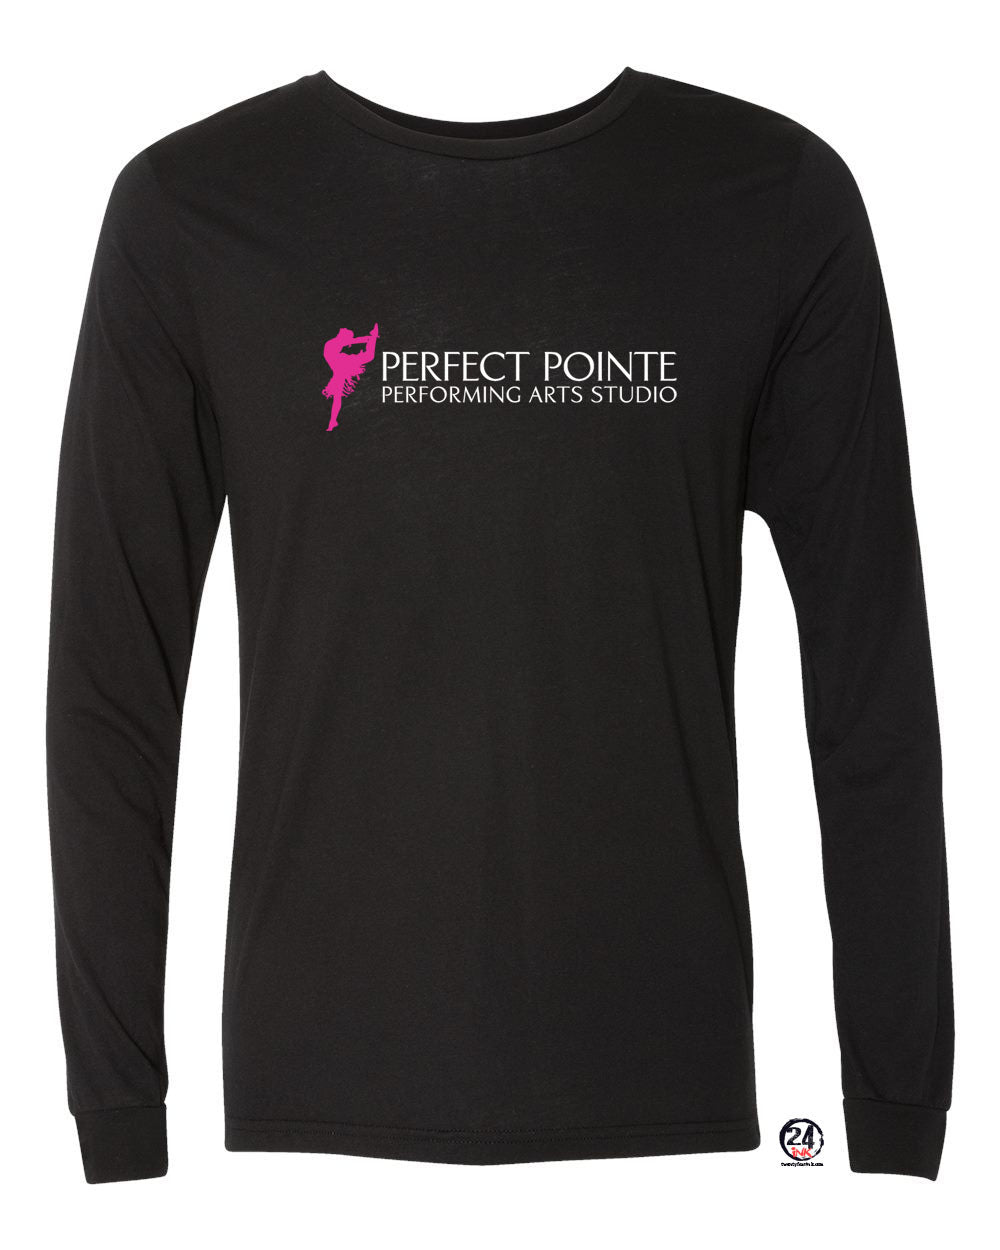 Perfect Pointe design 1 Long Sleeve